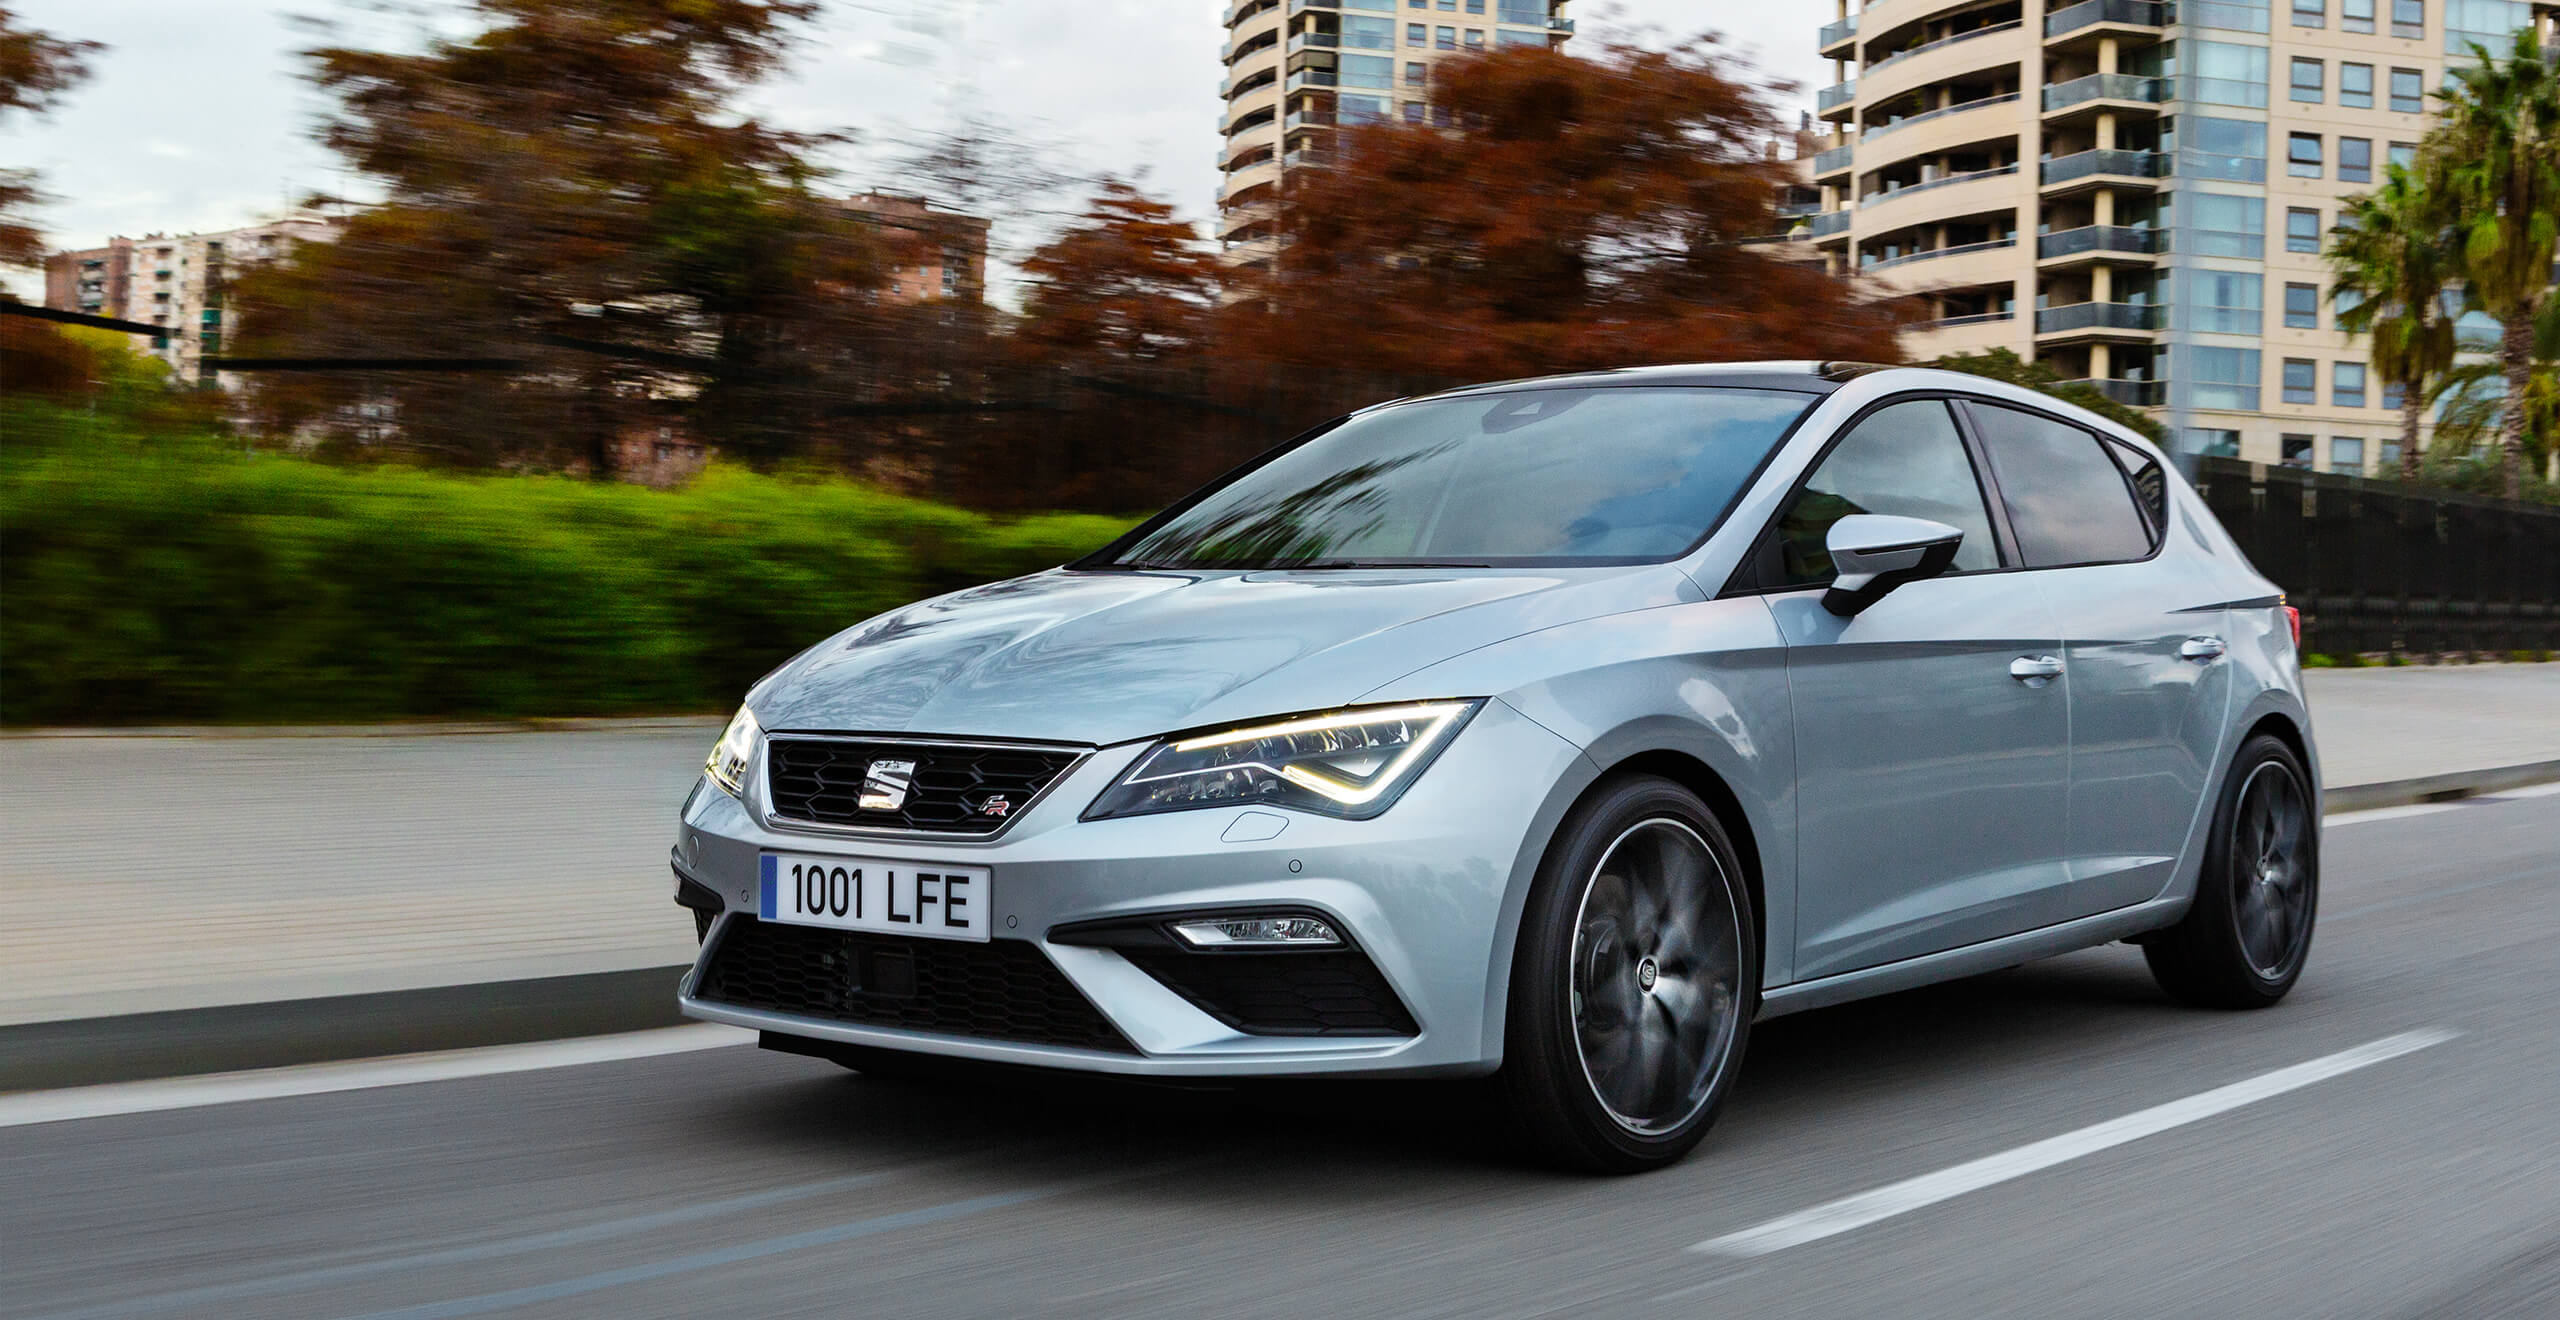 SEAT Leon exterior side angle view